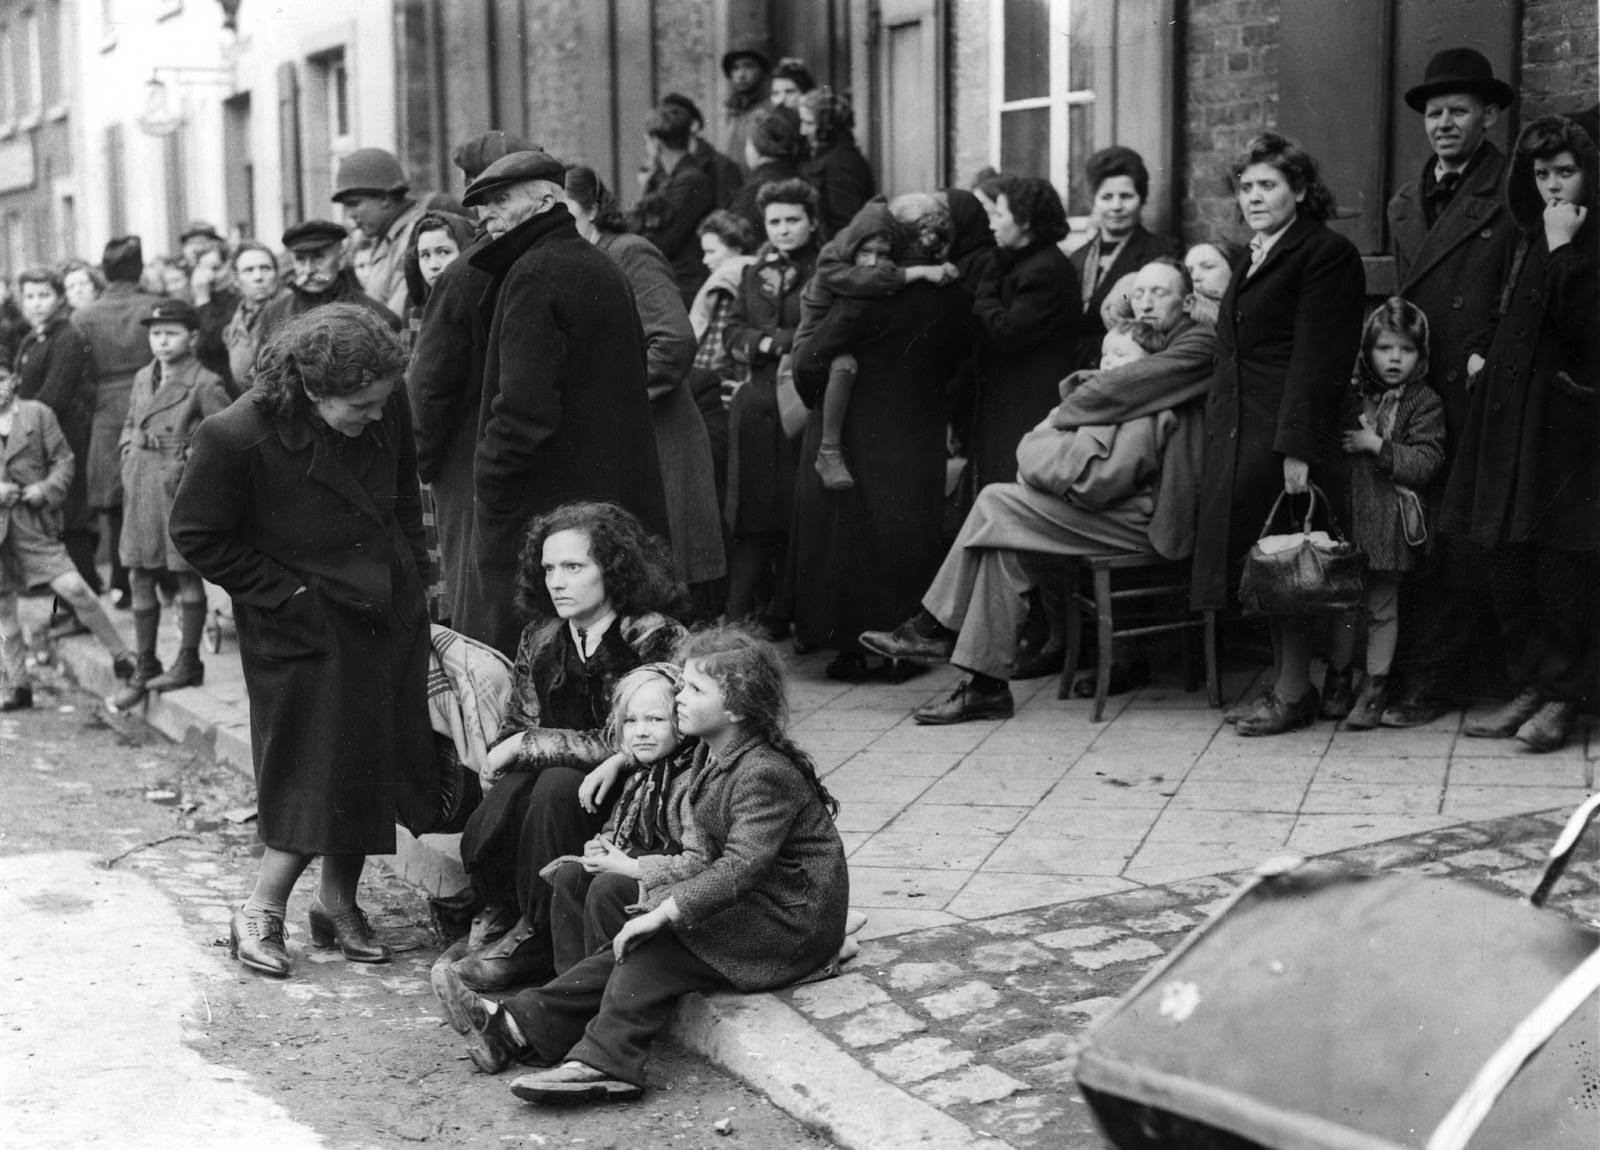 German refugees crowding the market square on Mar. 3, 1945, at Juchen, Germany, a town captured by the U.S. Army at the end of the Second World War.